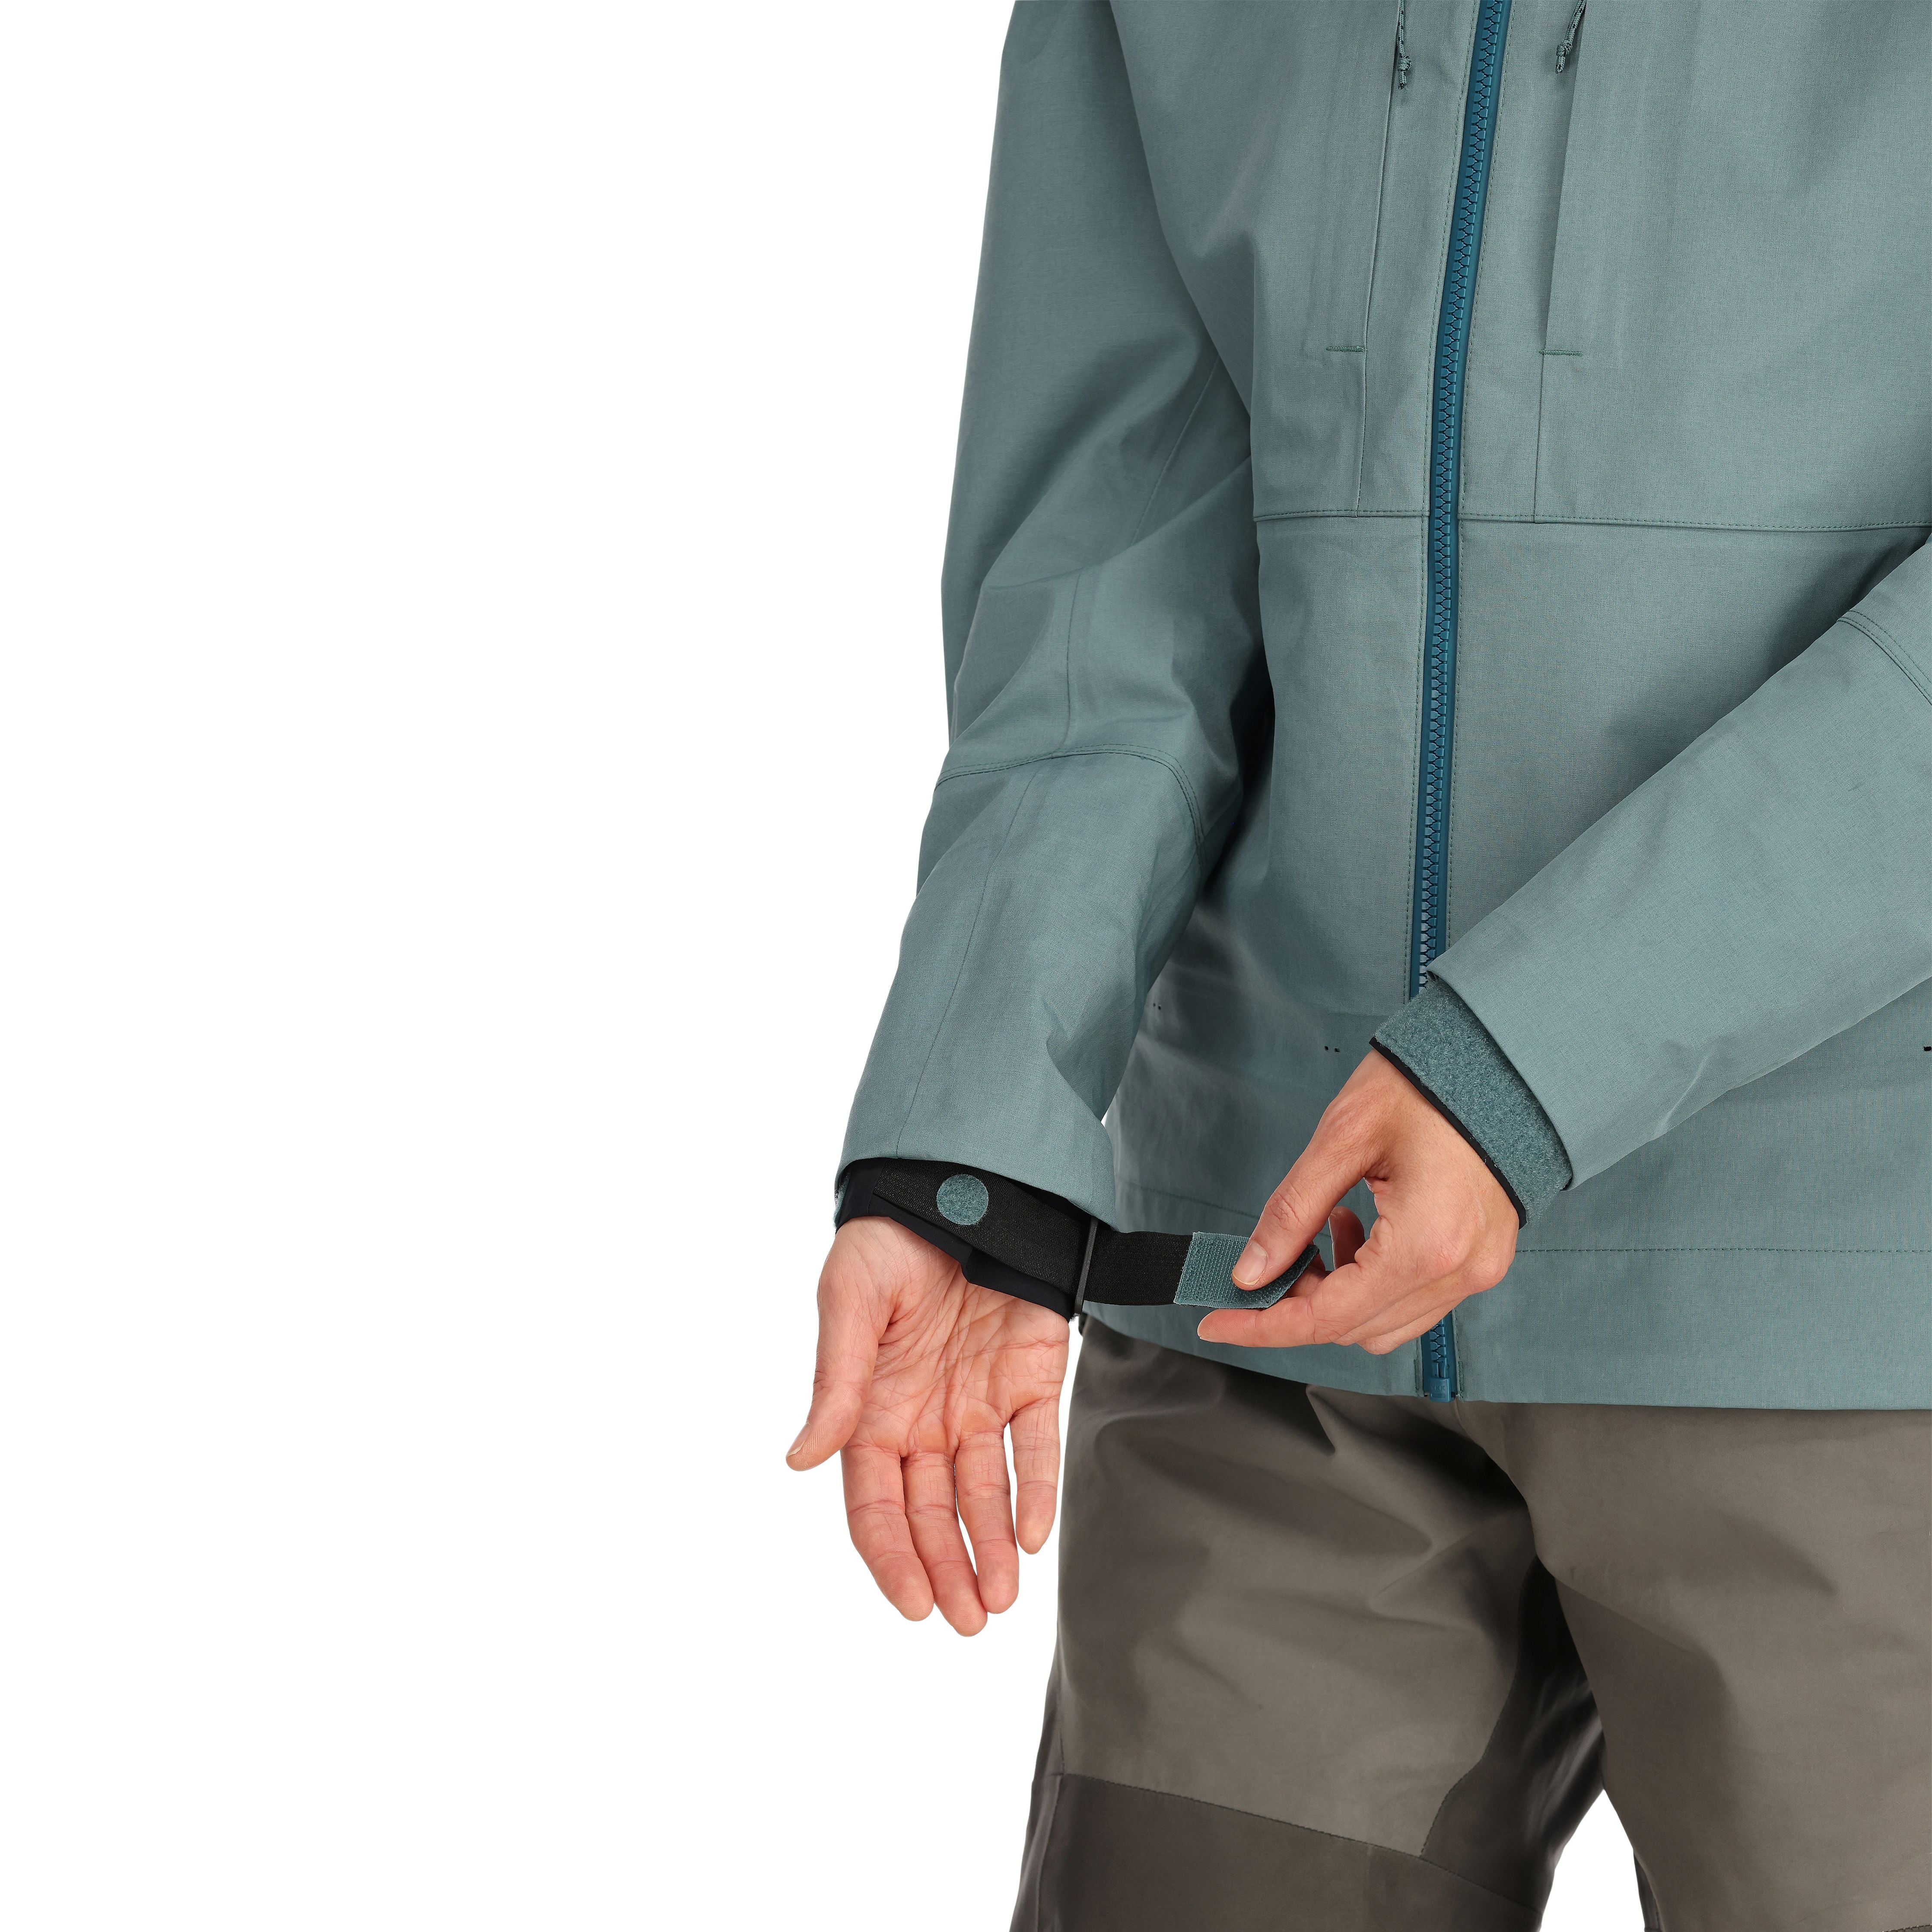 Simms Women's G3 Guide Jacket Avalon Teal Image 09